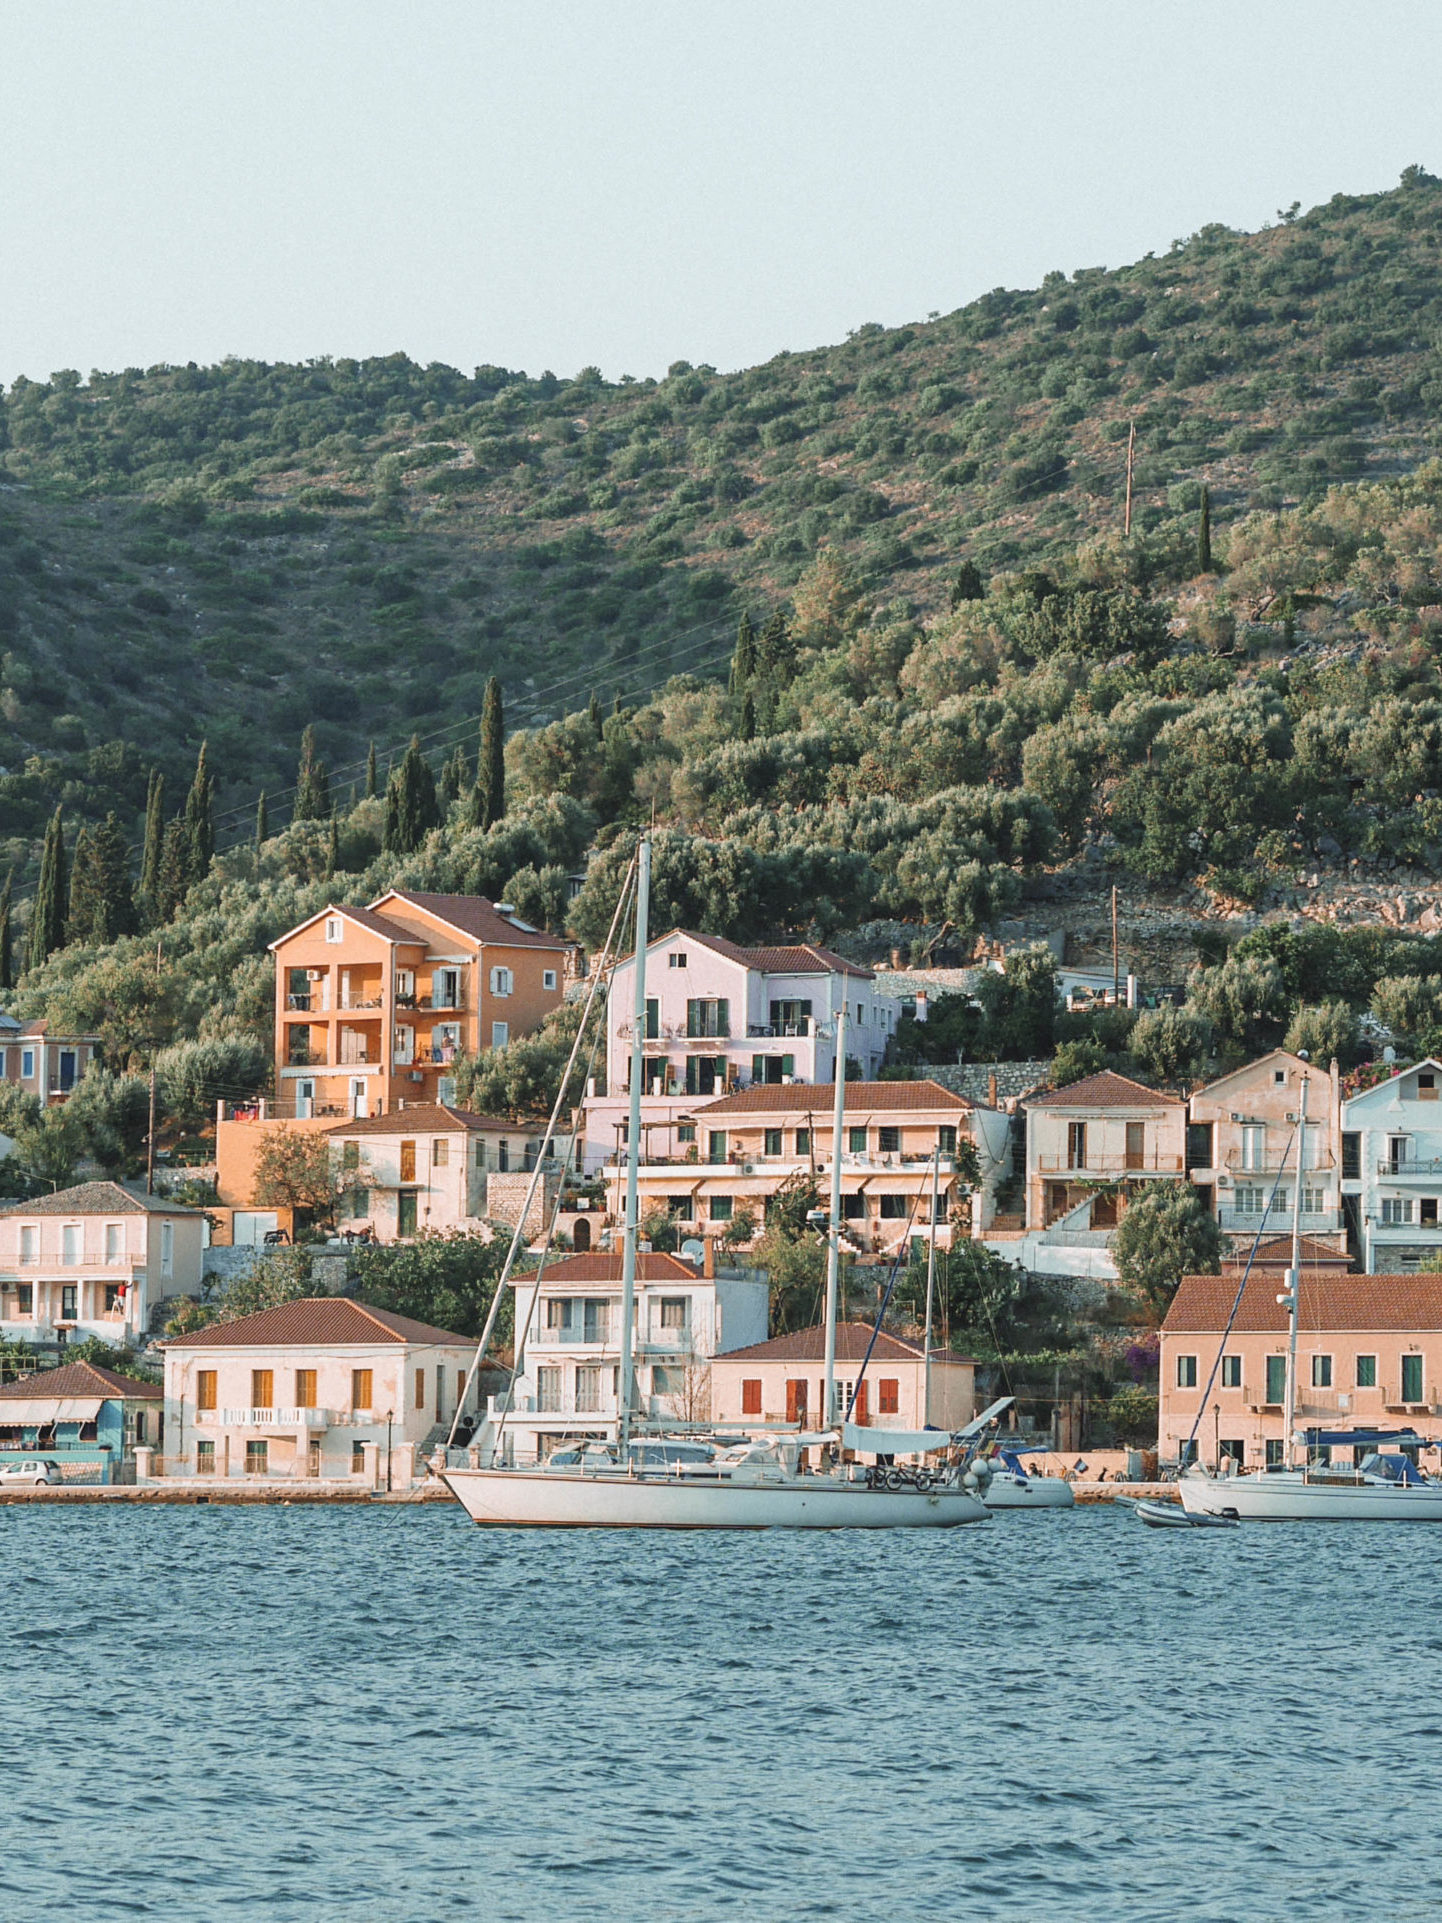 How to get to Ithaca Greece